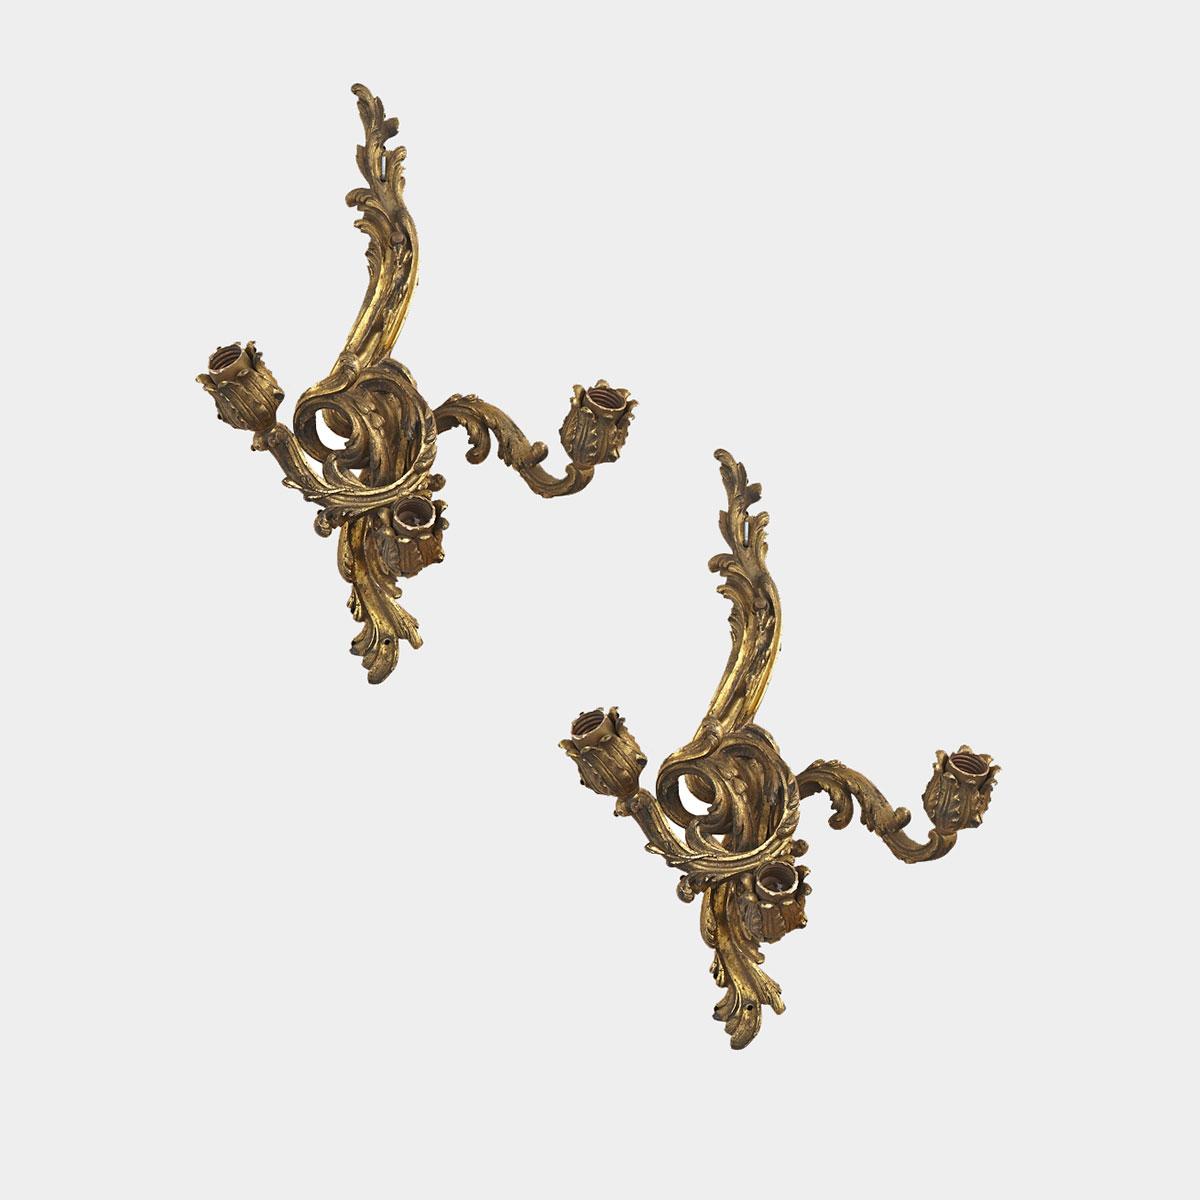 Pair of Rococo Revival Three Light Sconces, early 20th century